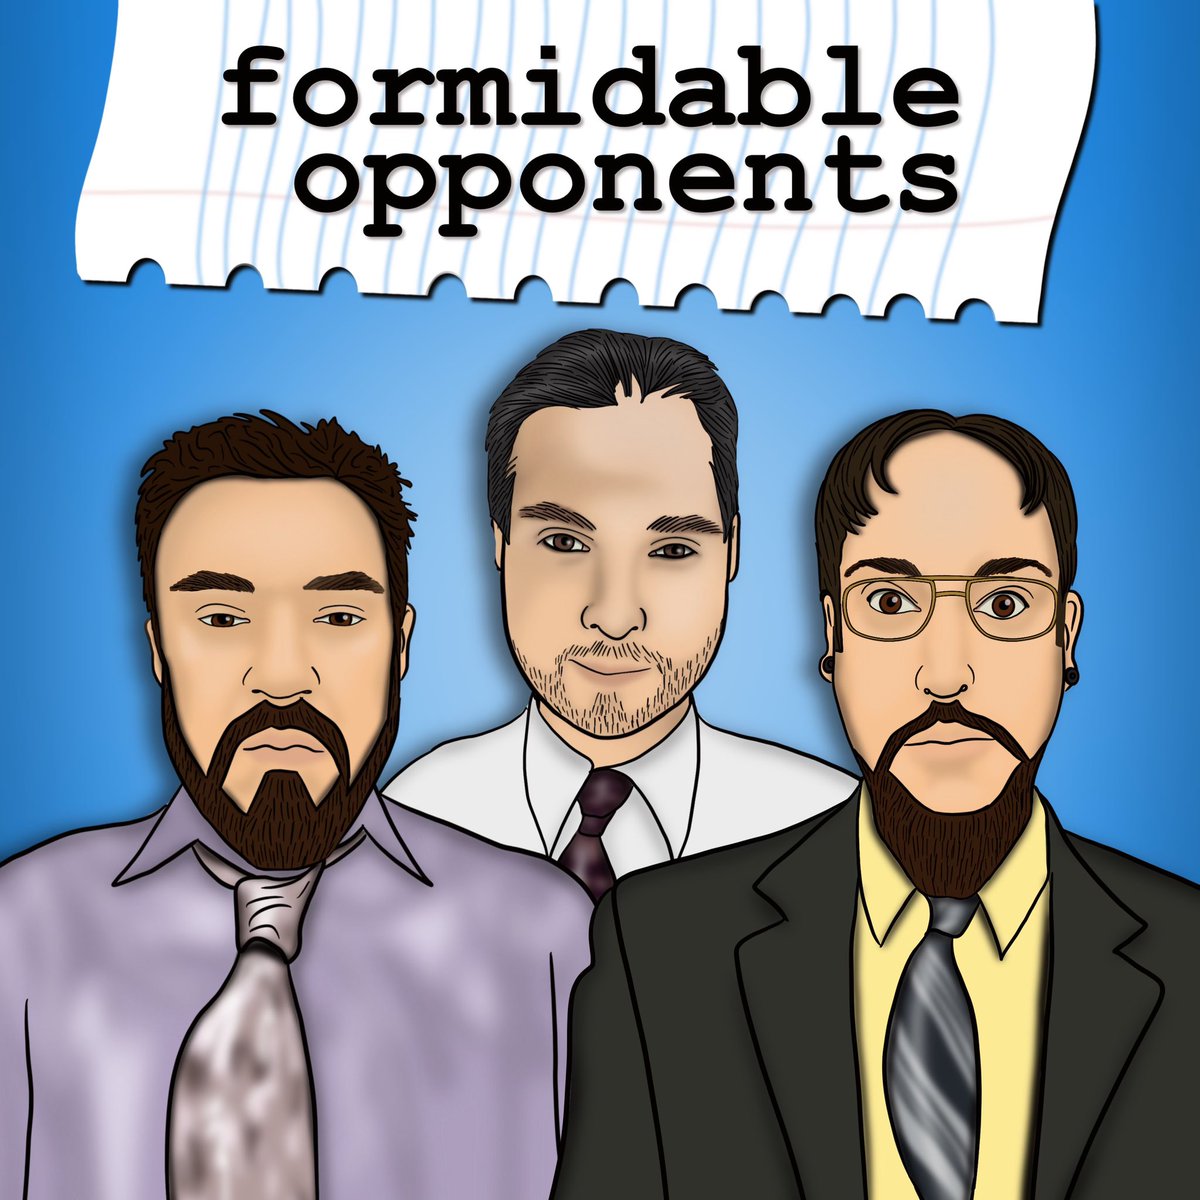 We’re back with an all new episode, check out our latest as we talk about a classic #tvseries “Best Character from The Office.” Check it out wherever you get your #podcasts

#podcast #newepisode #tv #2000s #theoffice #popculture #nostalgia #comedy #formidableopponents #spotify